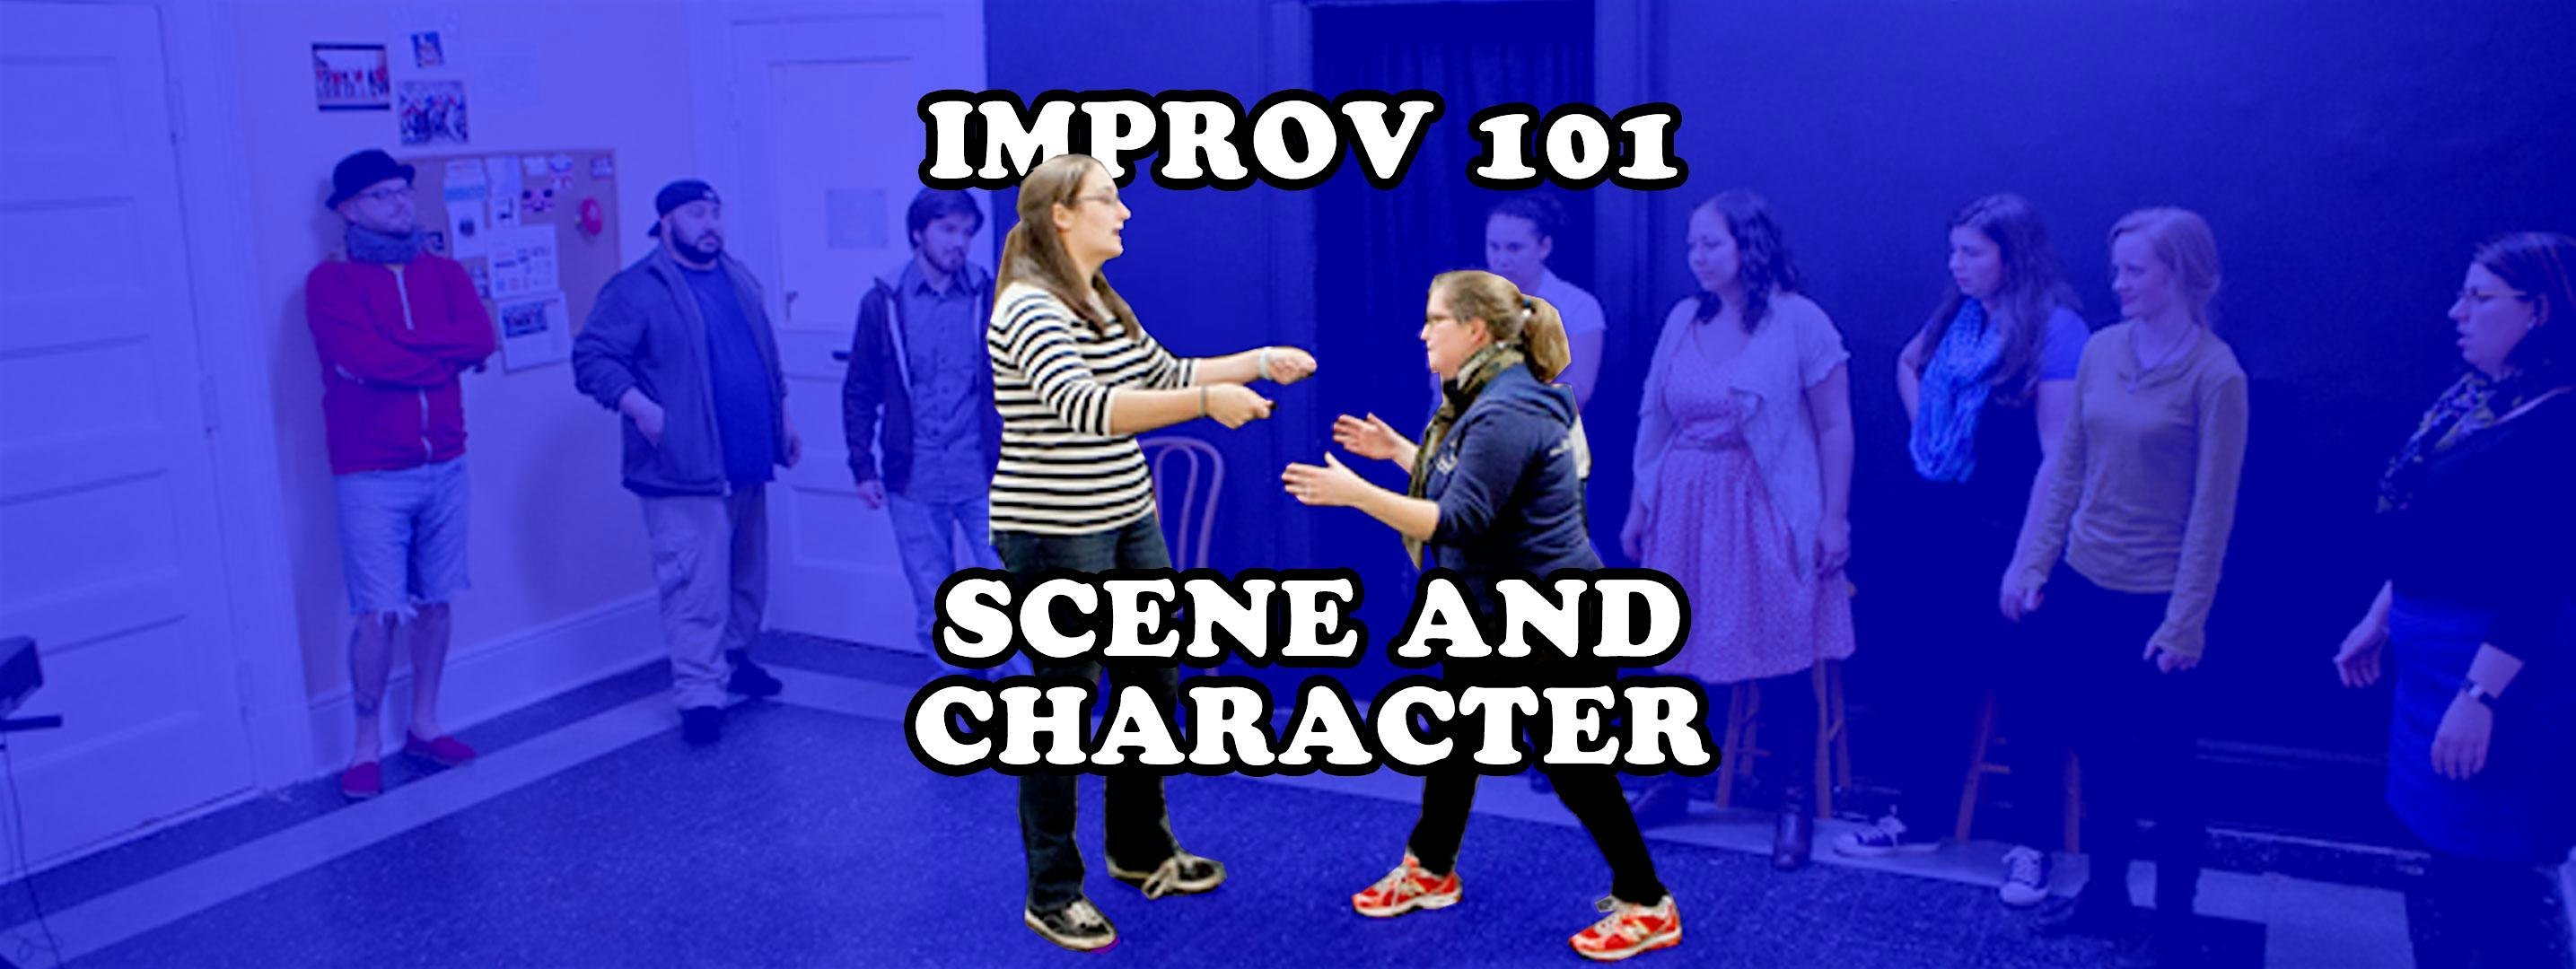 Improv 101 - Scene and Character